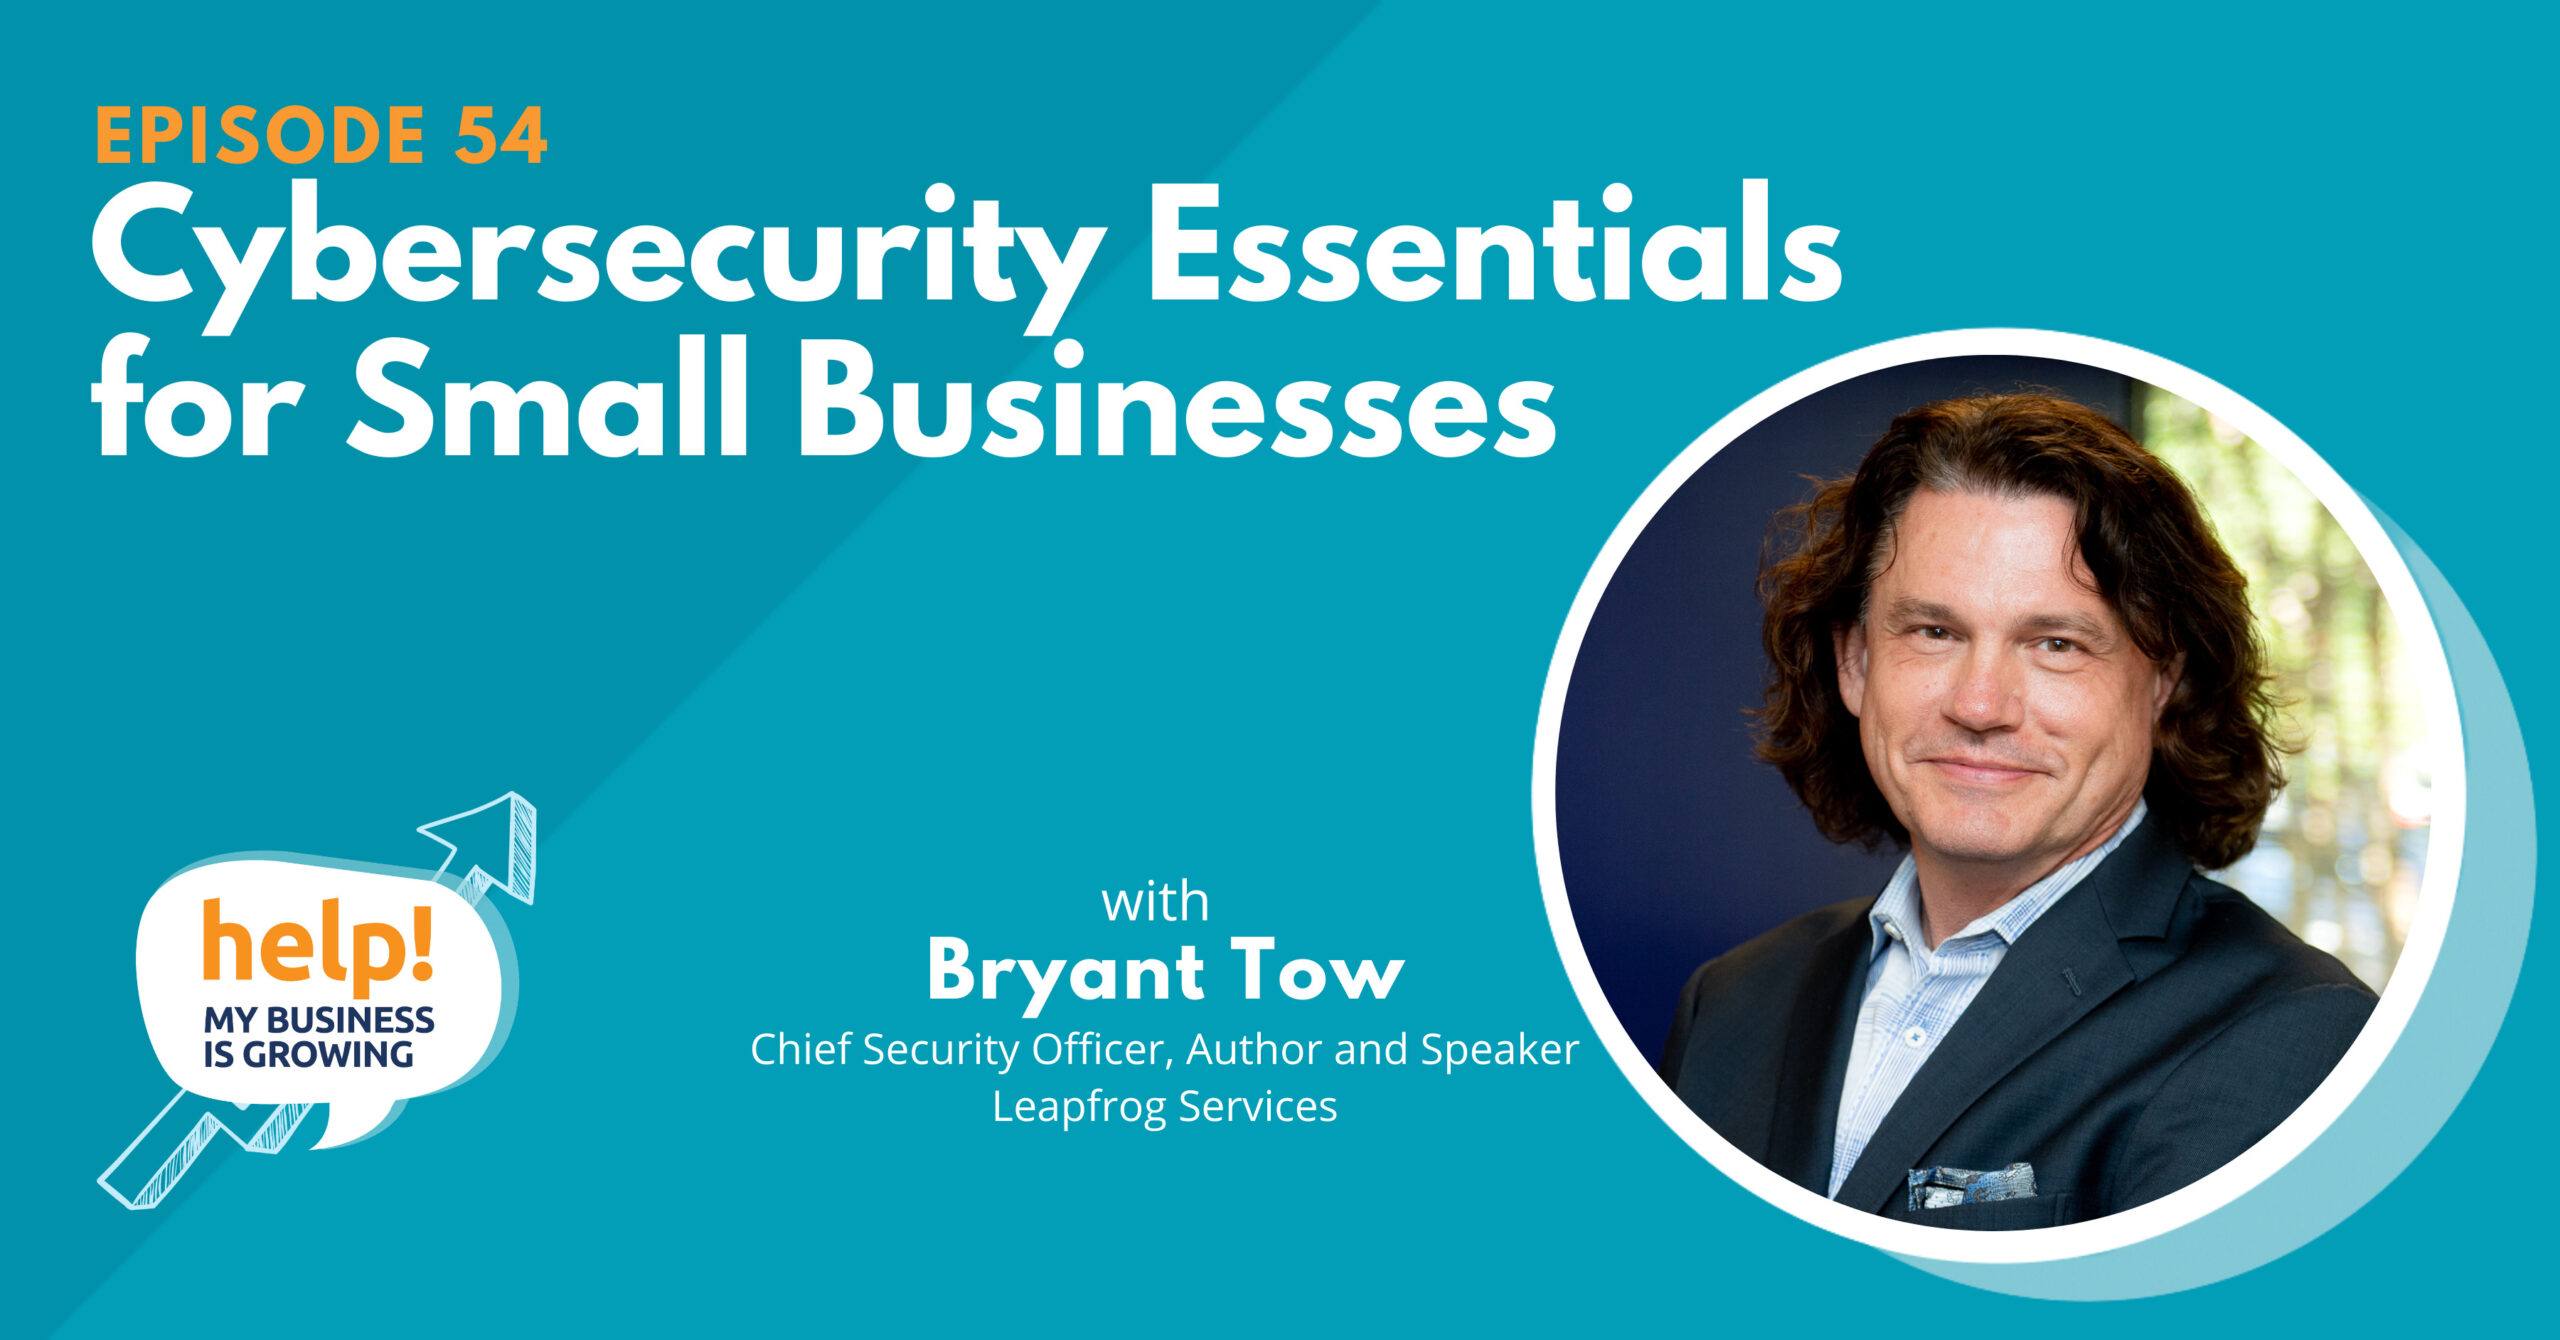 Cybersecurity Essentials for Small Businesses